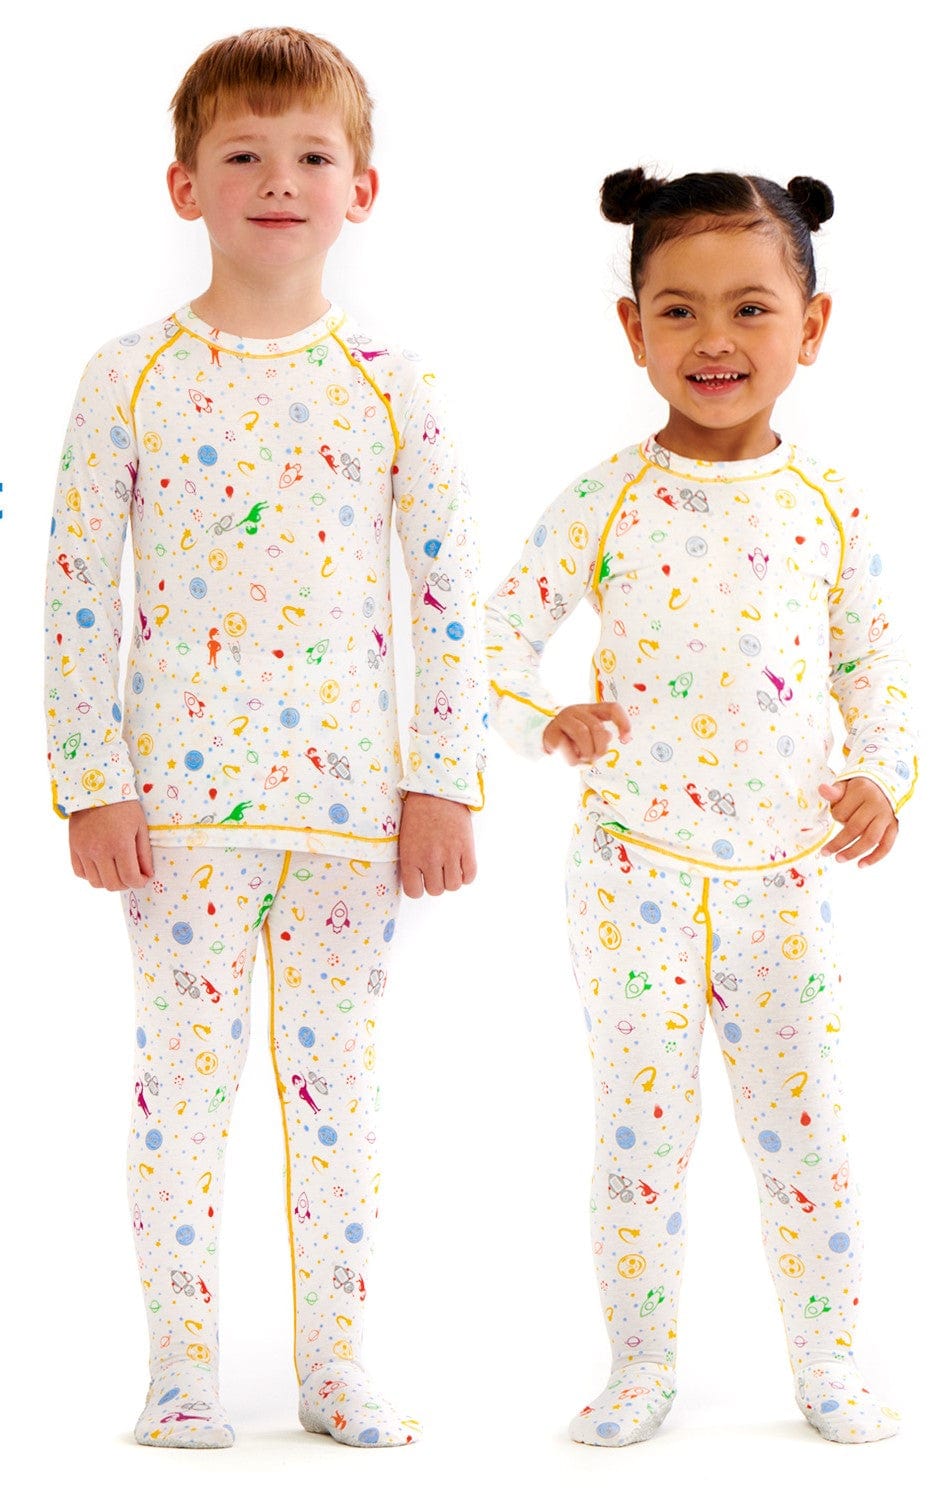 Soothems Eczema Pajamas Kids Set for Wet Wrap Therapy and Itch Relief | Soothems Itch Relief Clothing 2 Toddler / White